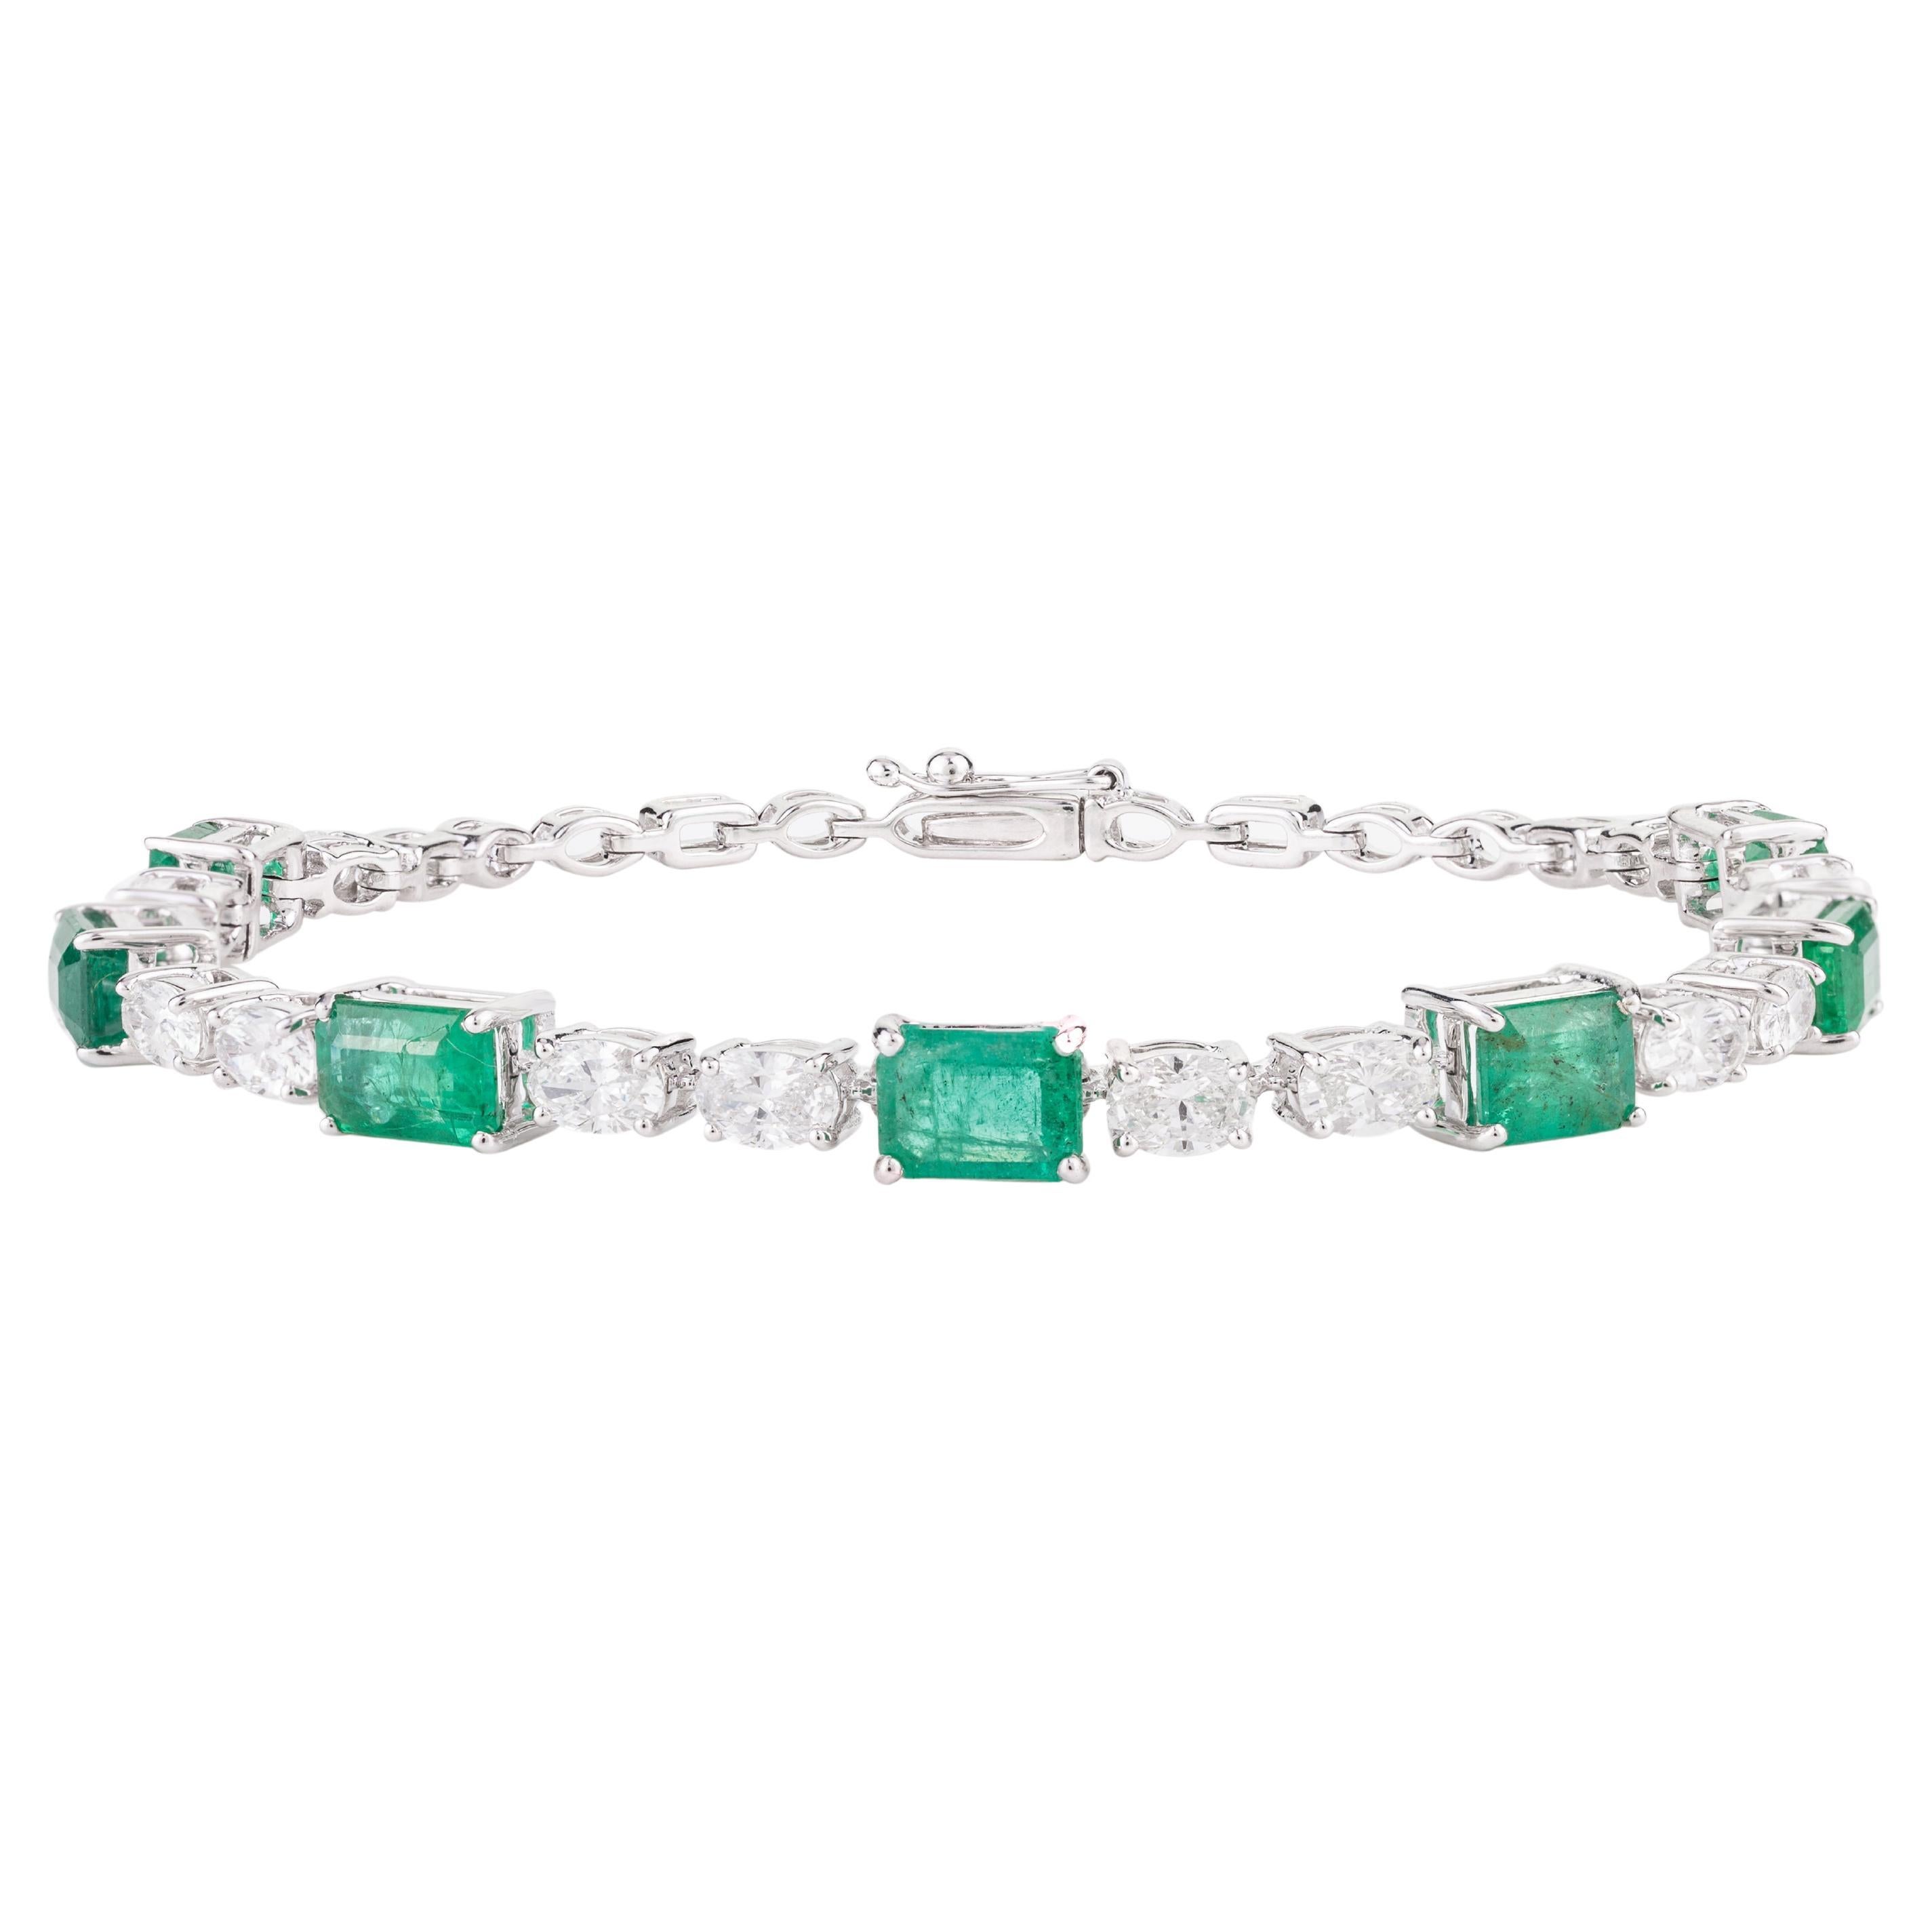 4.11 CTW Emerald and 2.24 CTW Diamond Tennis Bracelet in 18K White Gold For Sale